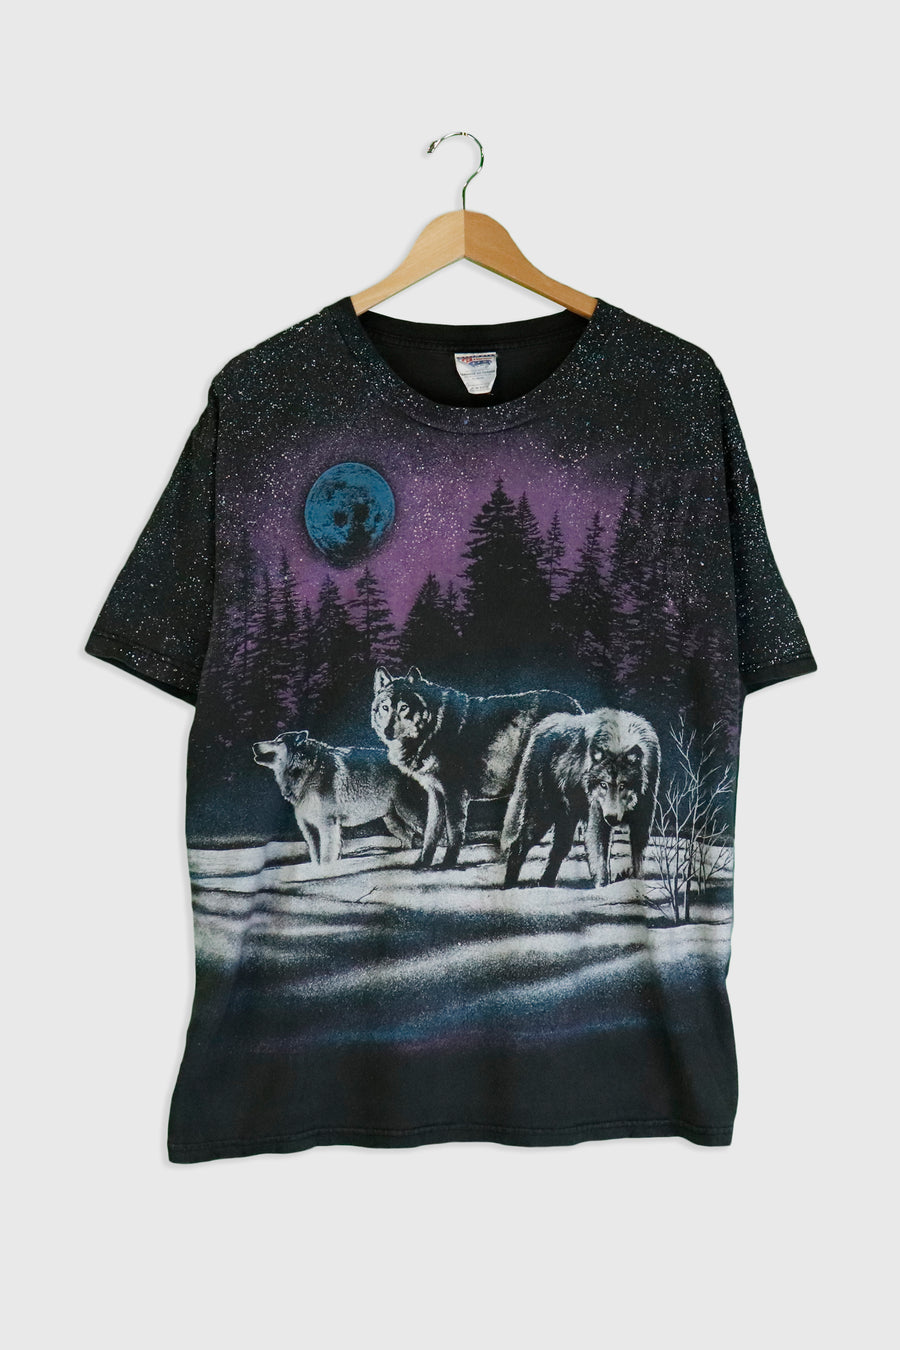 Vintage Wolf Under Full Moon And Starts Graphic T Shirt Sz XL